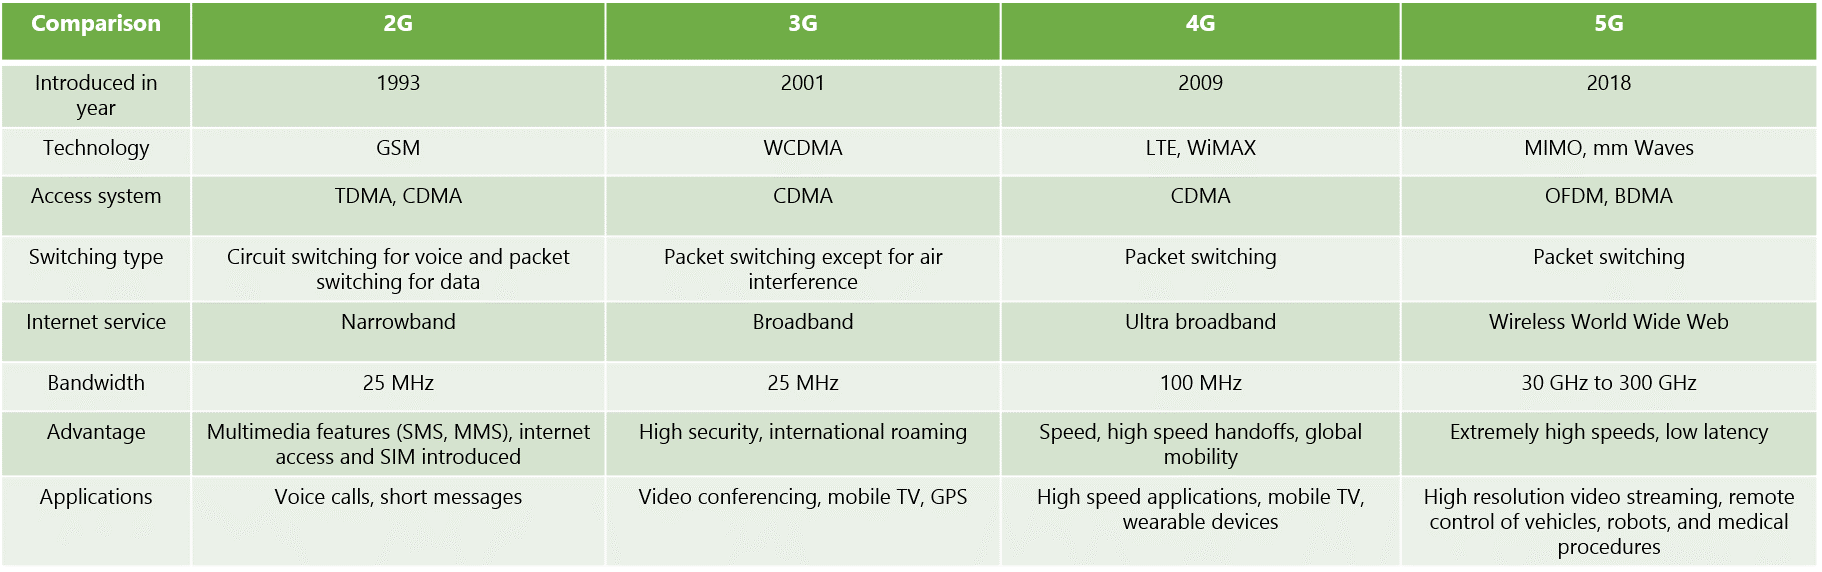 table-comparison-of-2g-3g-4g-5g